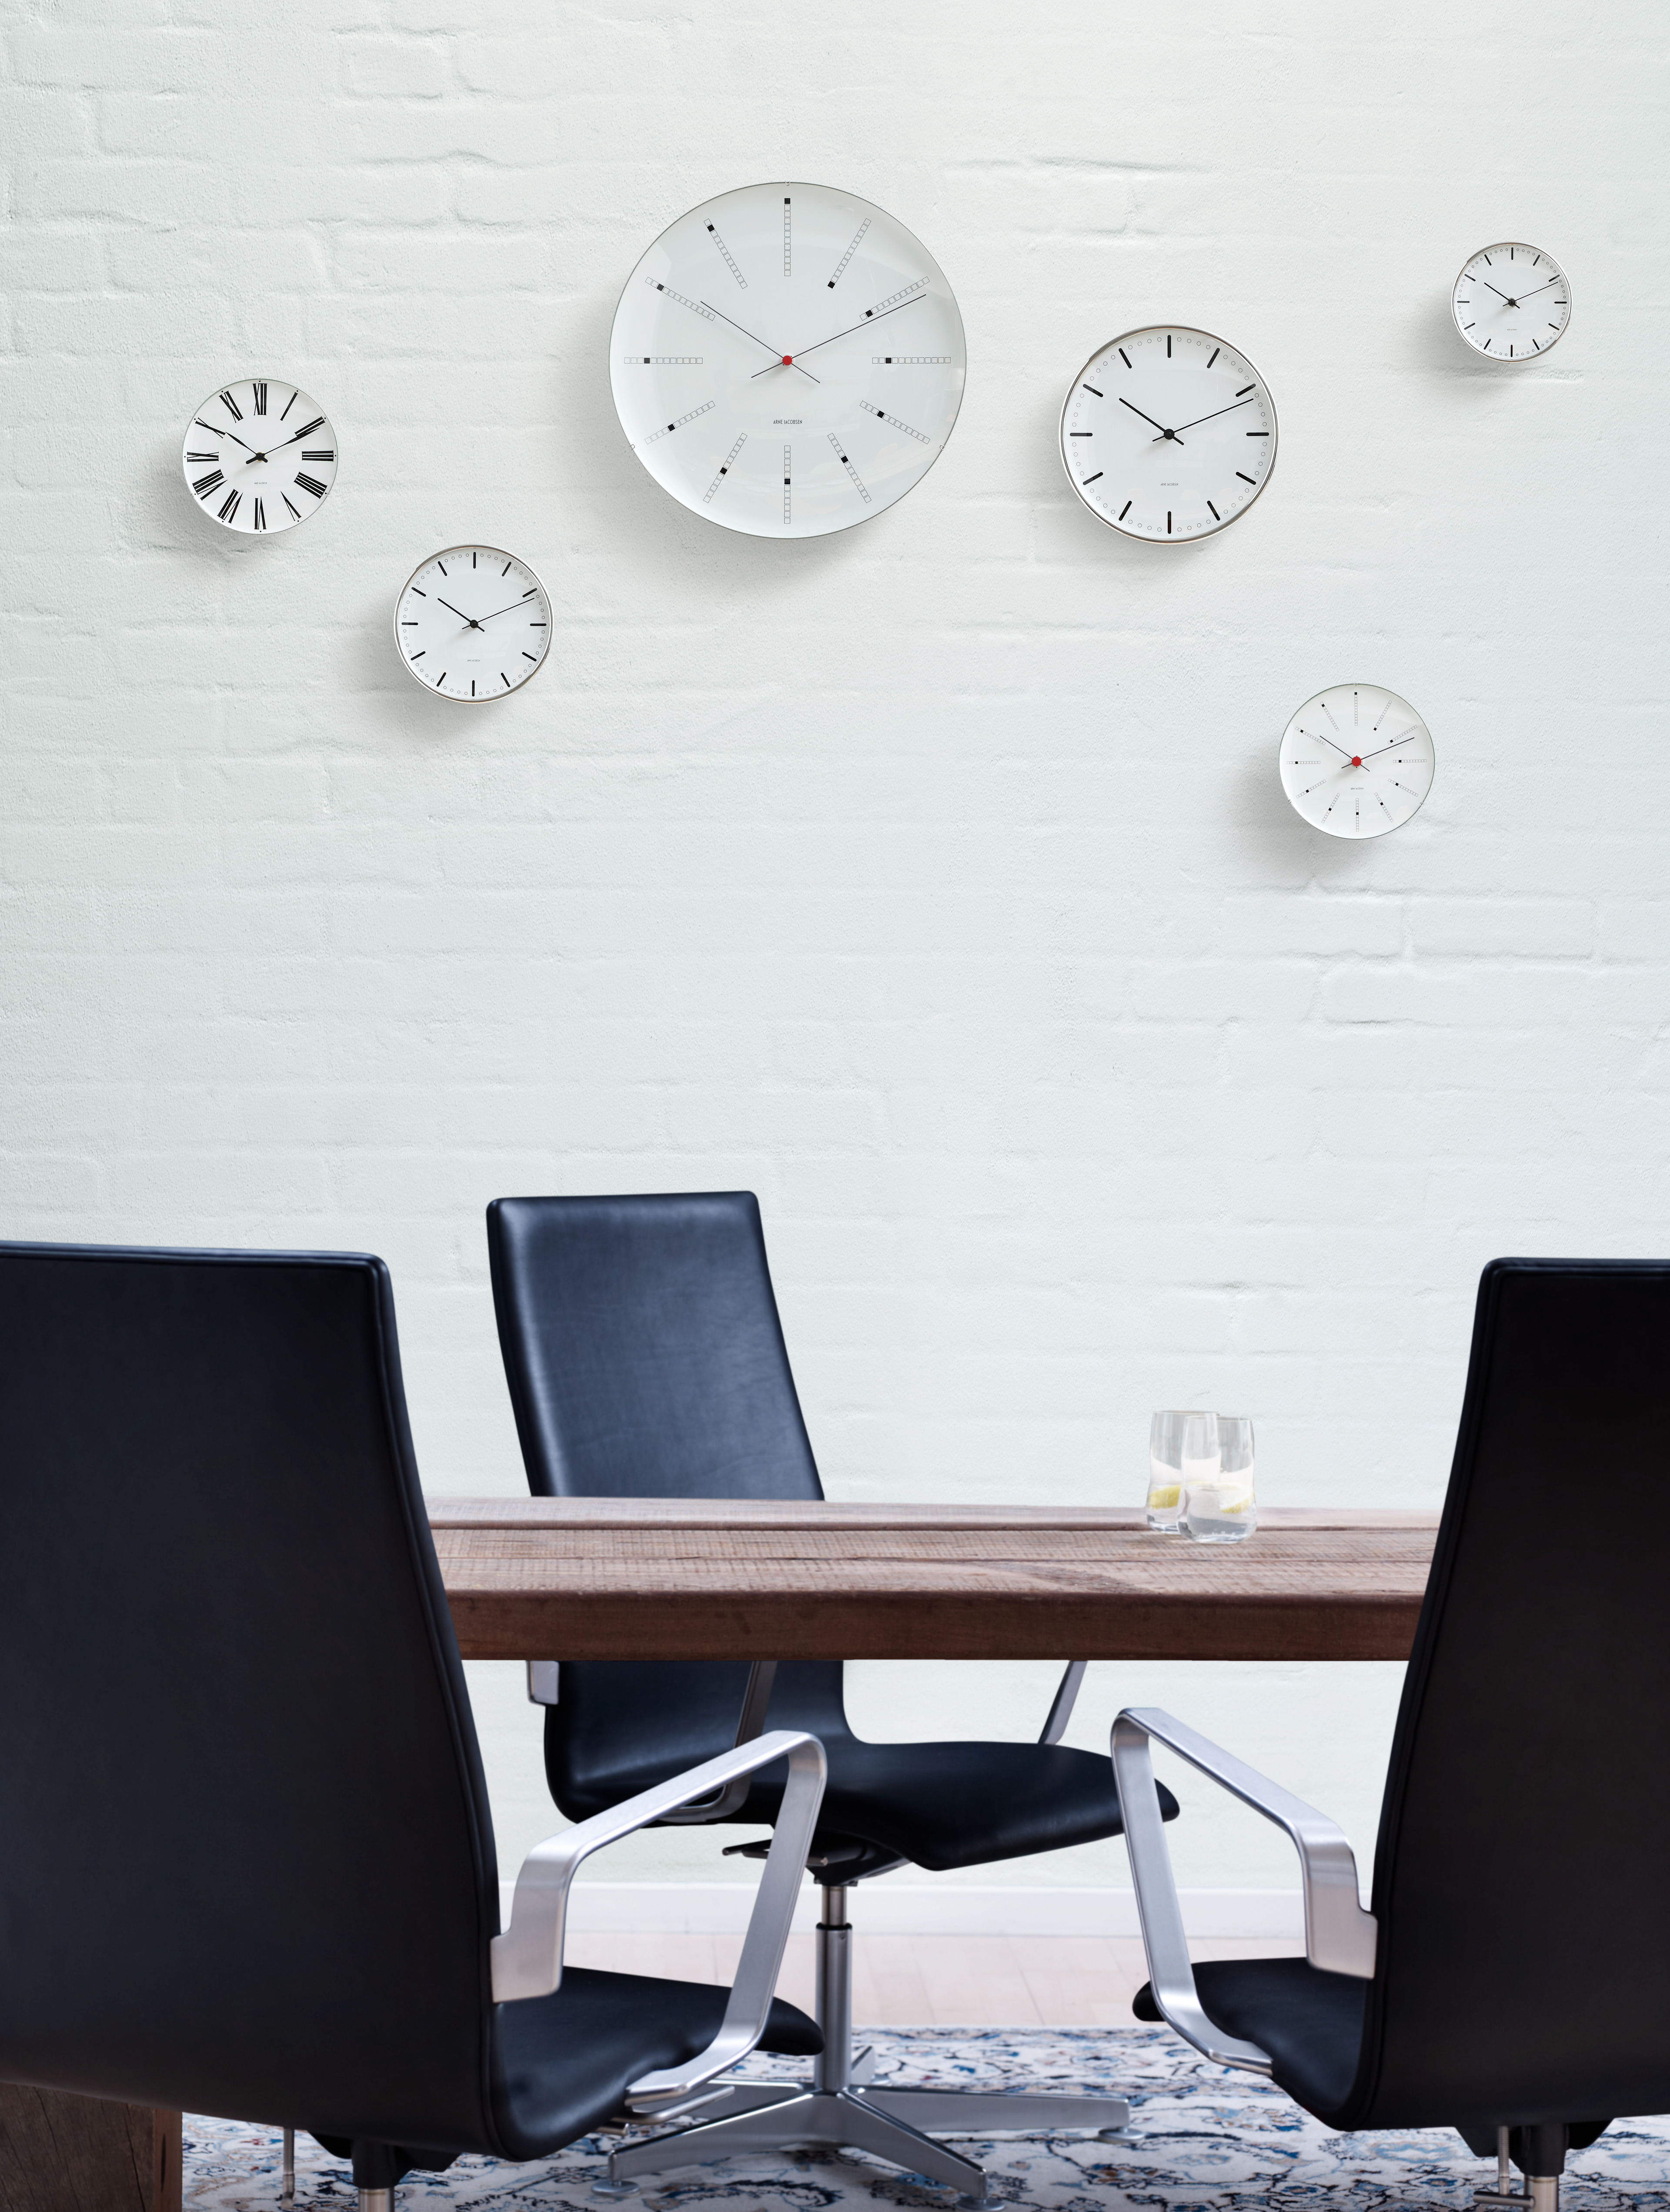 Wall clocks from Arne Jacobsen Clocks in different sizes